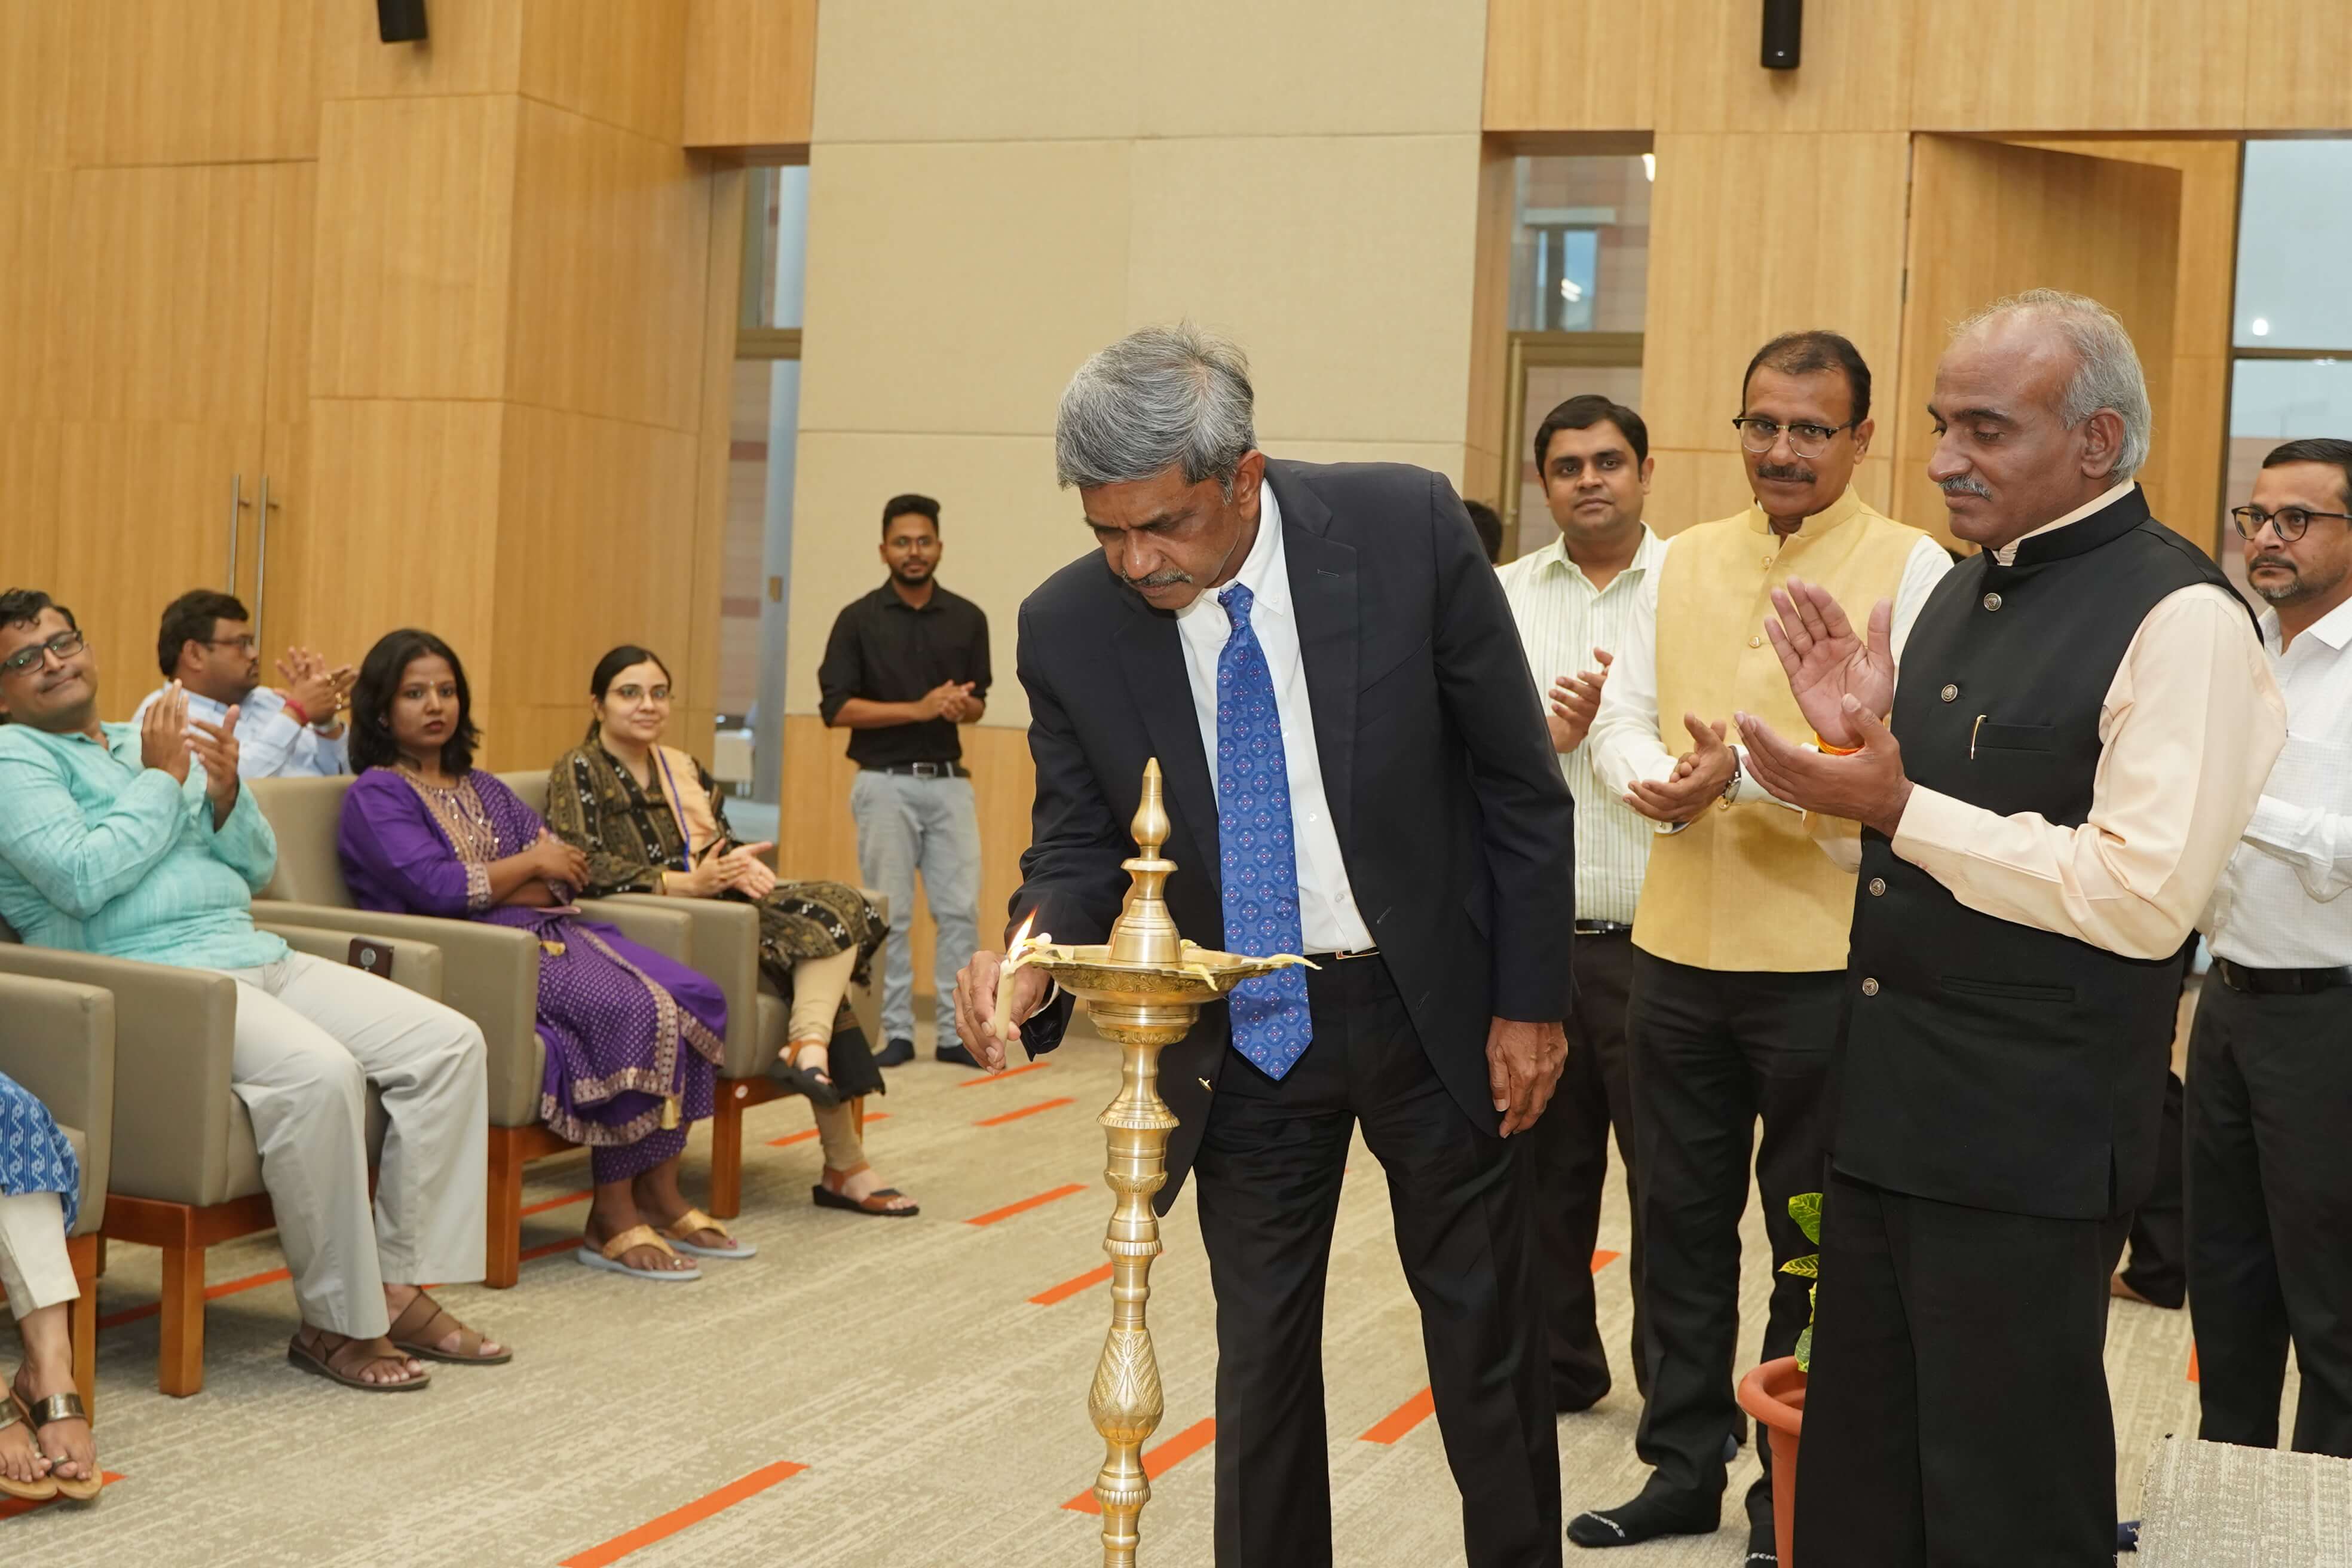 Success & failure are part of life, be resilient: Mr. Shiv Shivakumar to MBA students